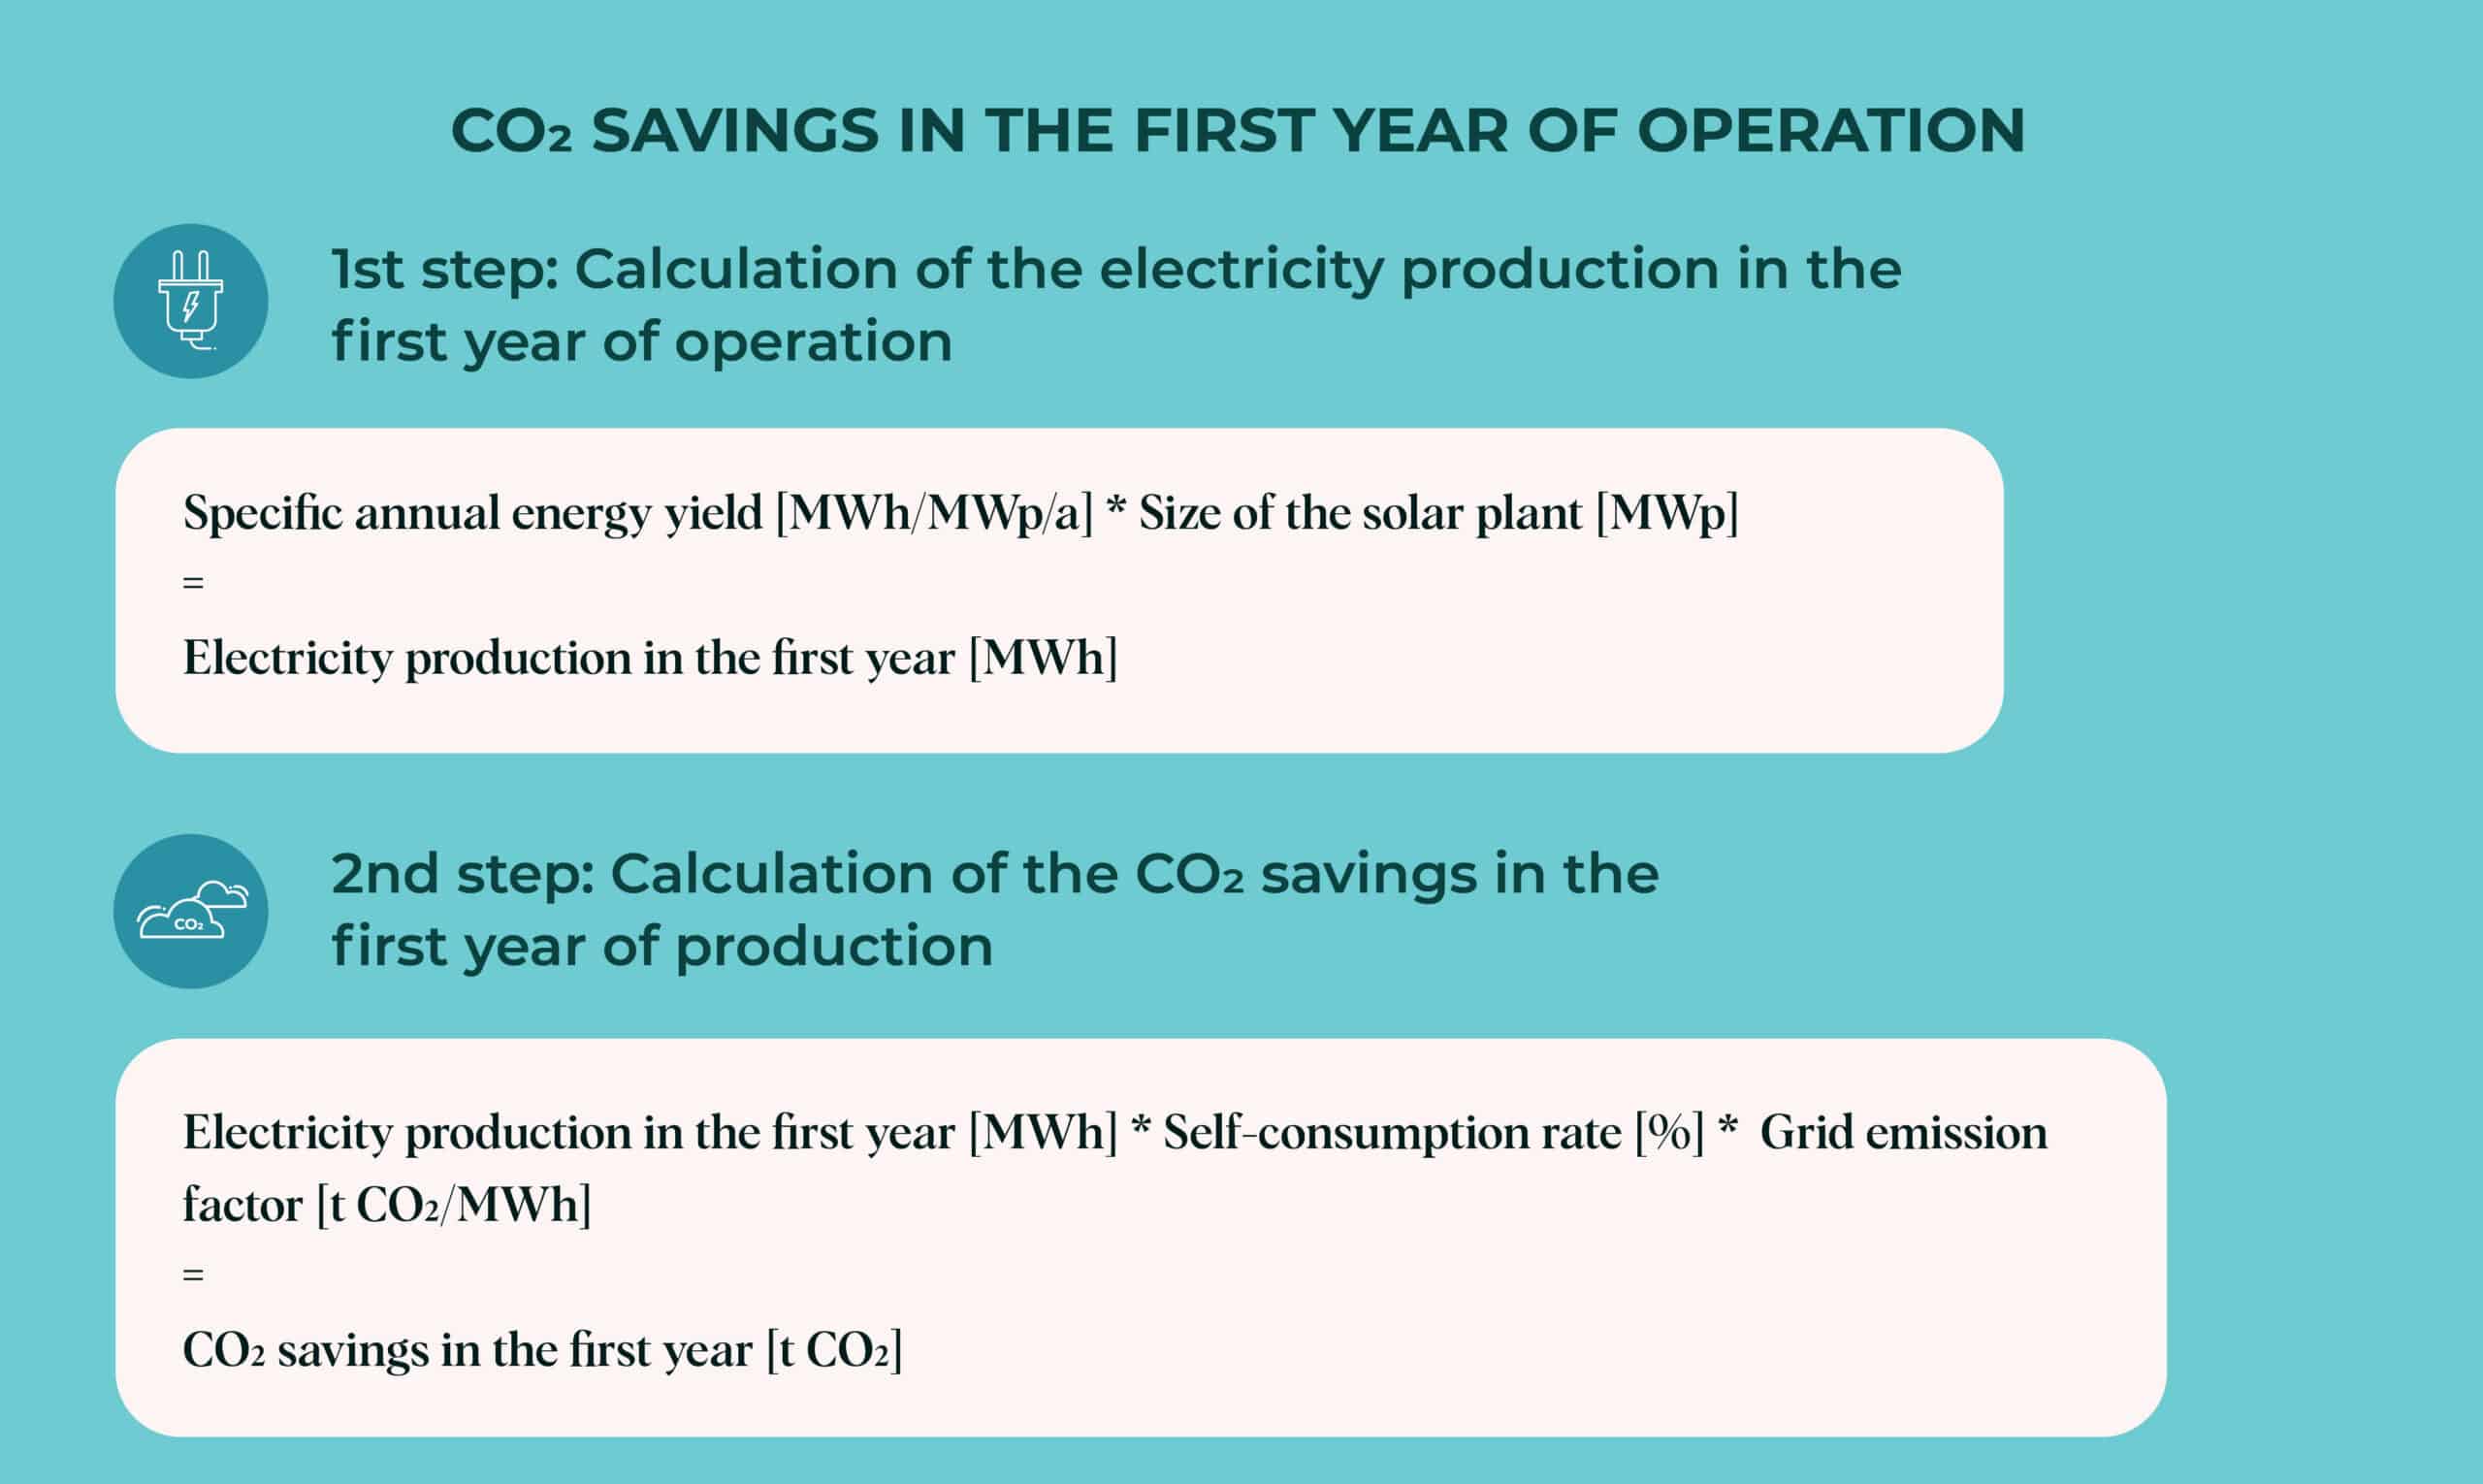 CO2 savings in the first year of operation